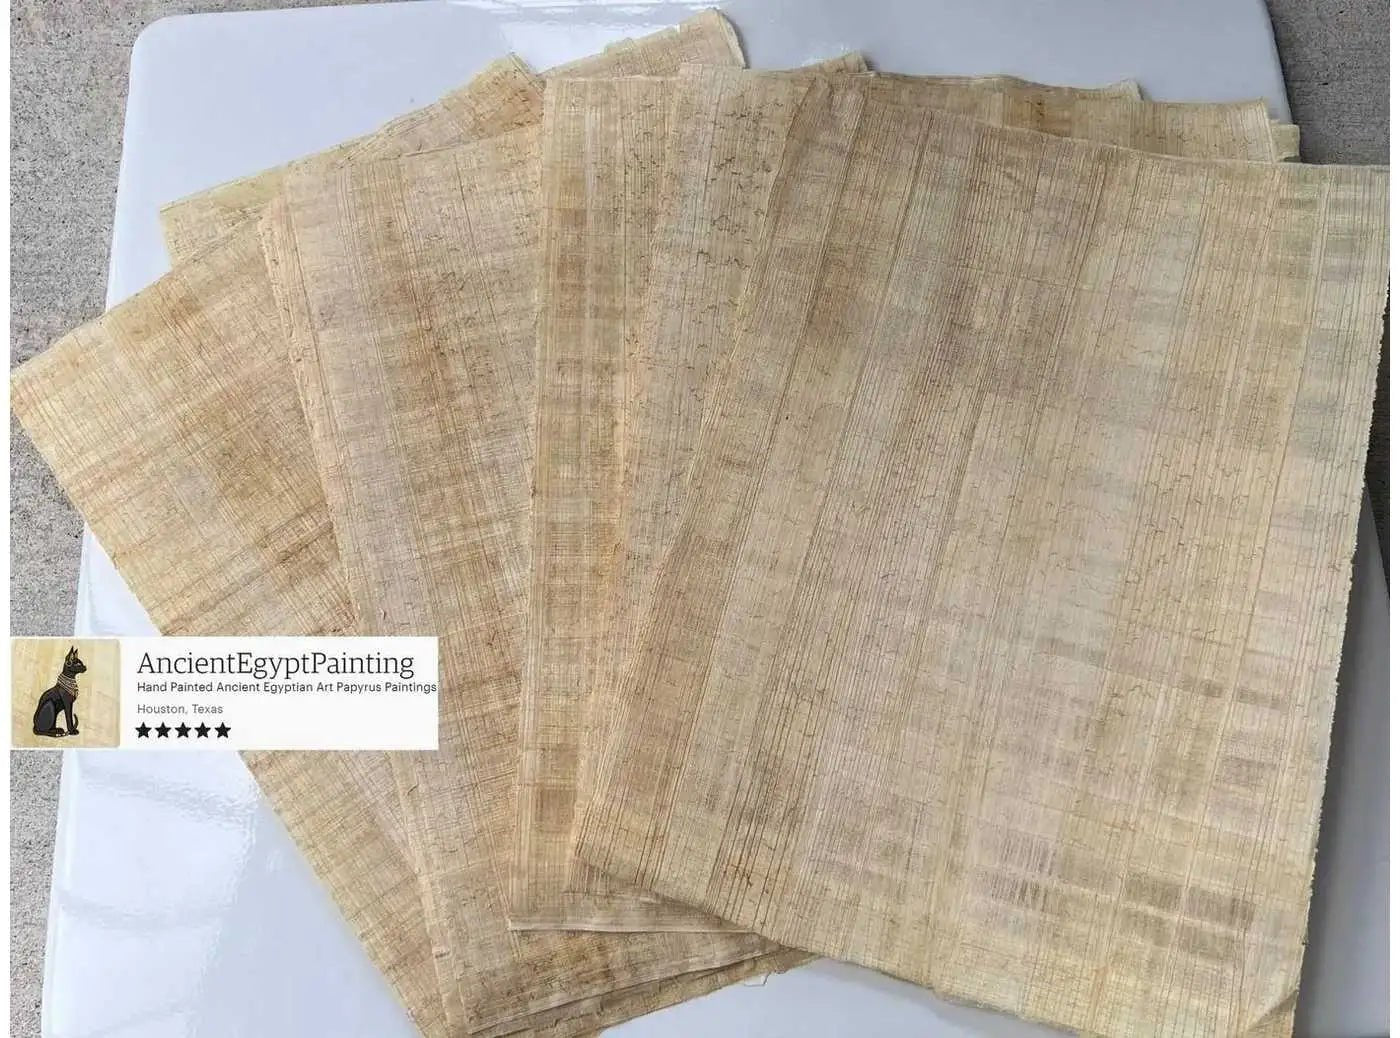 Egyptian Blank Papyrus Handmade Paper Sheets Set of 5-10-20 - Scrapbooking Art Projects Schools - Papyri Old Paper